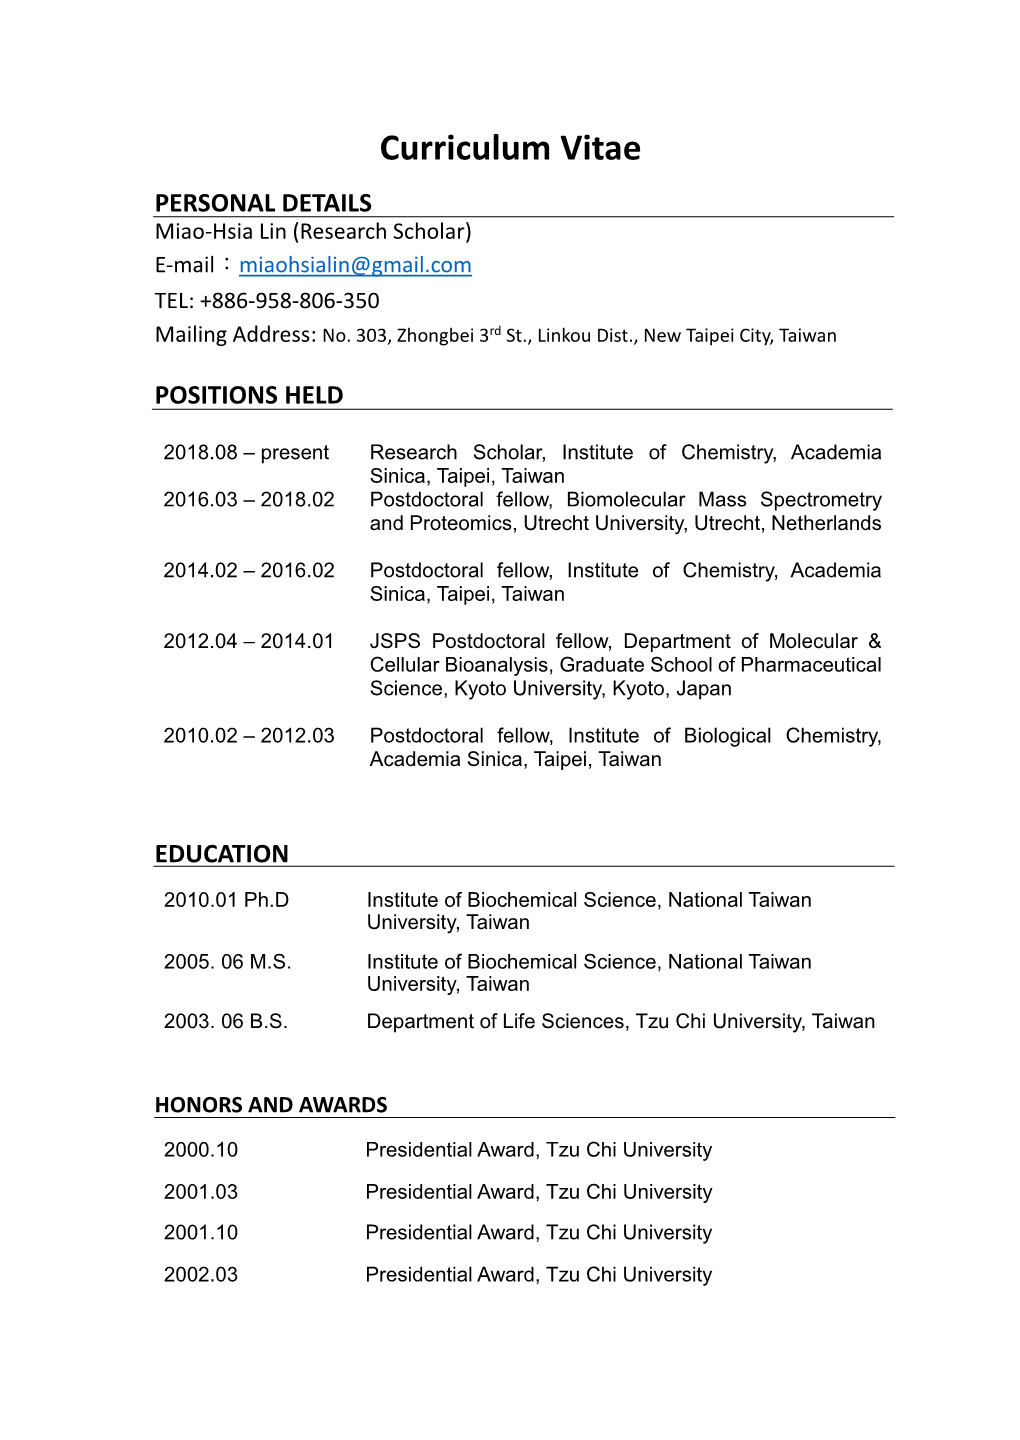 Curriculum Vitae PERSONAL DETAILS Miao-Hsia Lin (Research Scholar) E-Mail：Miaohsialin@Gmail.Com TEL: +886-958-806-350 Mailing Address: No